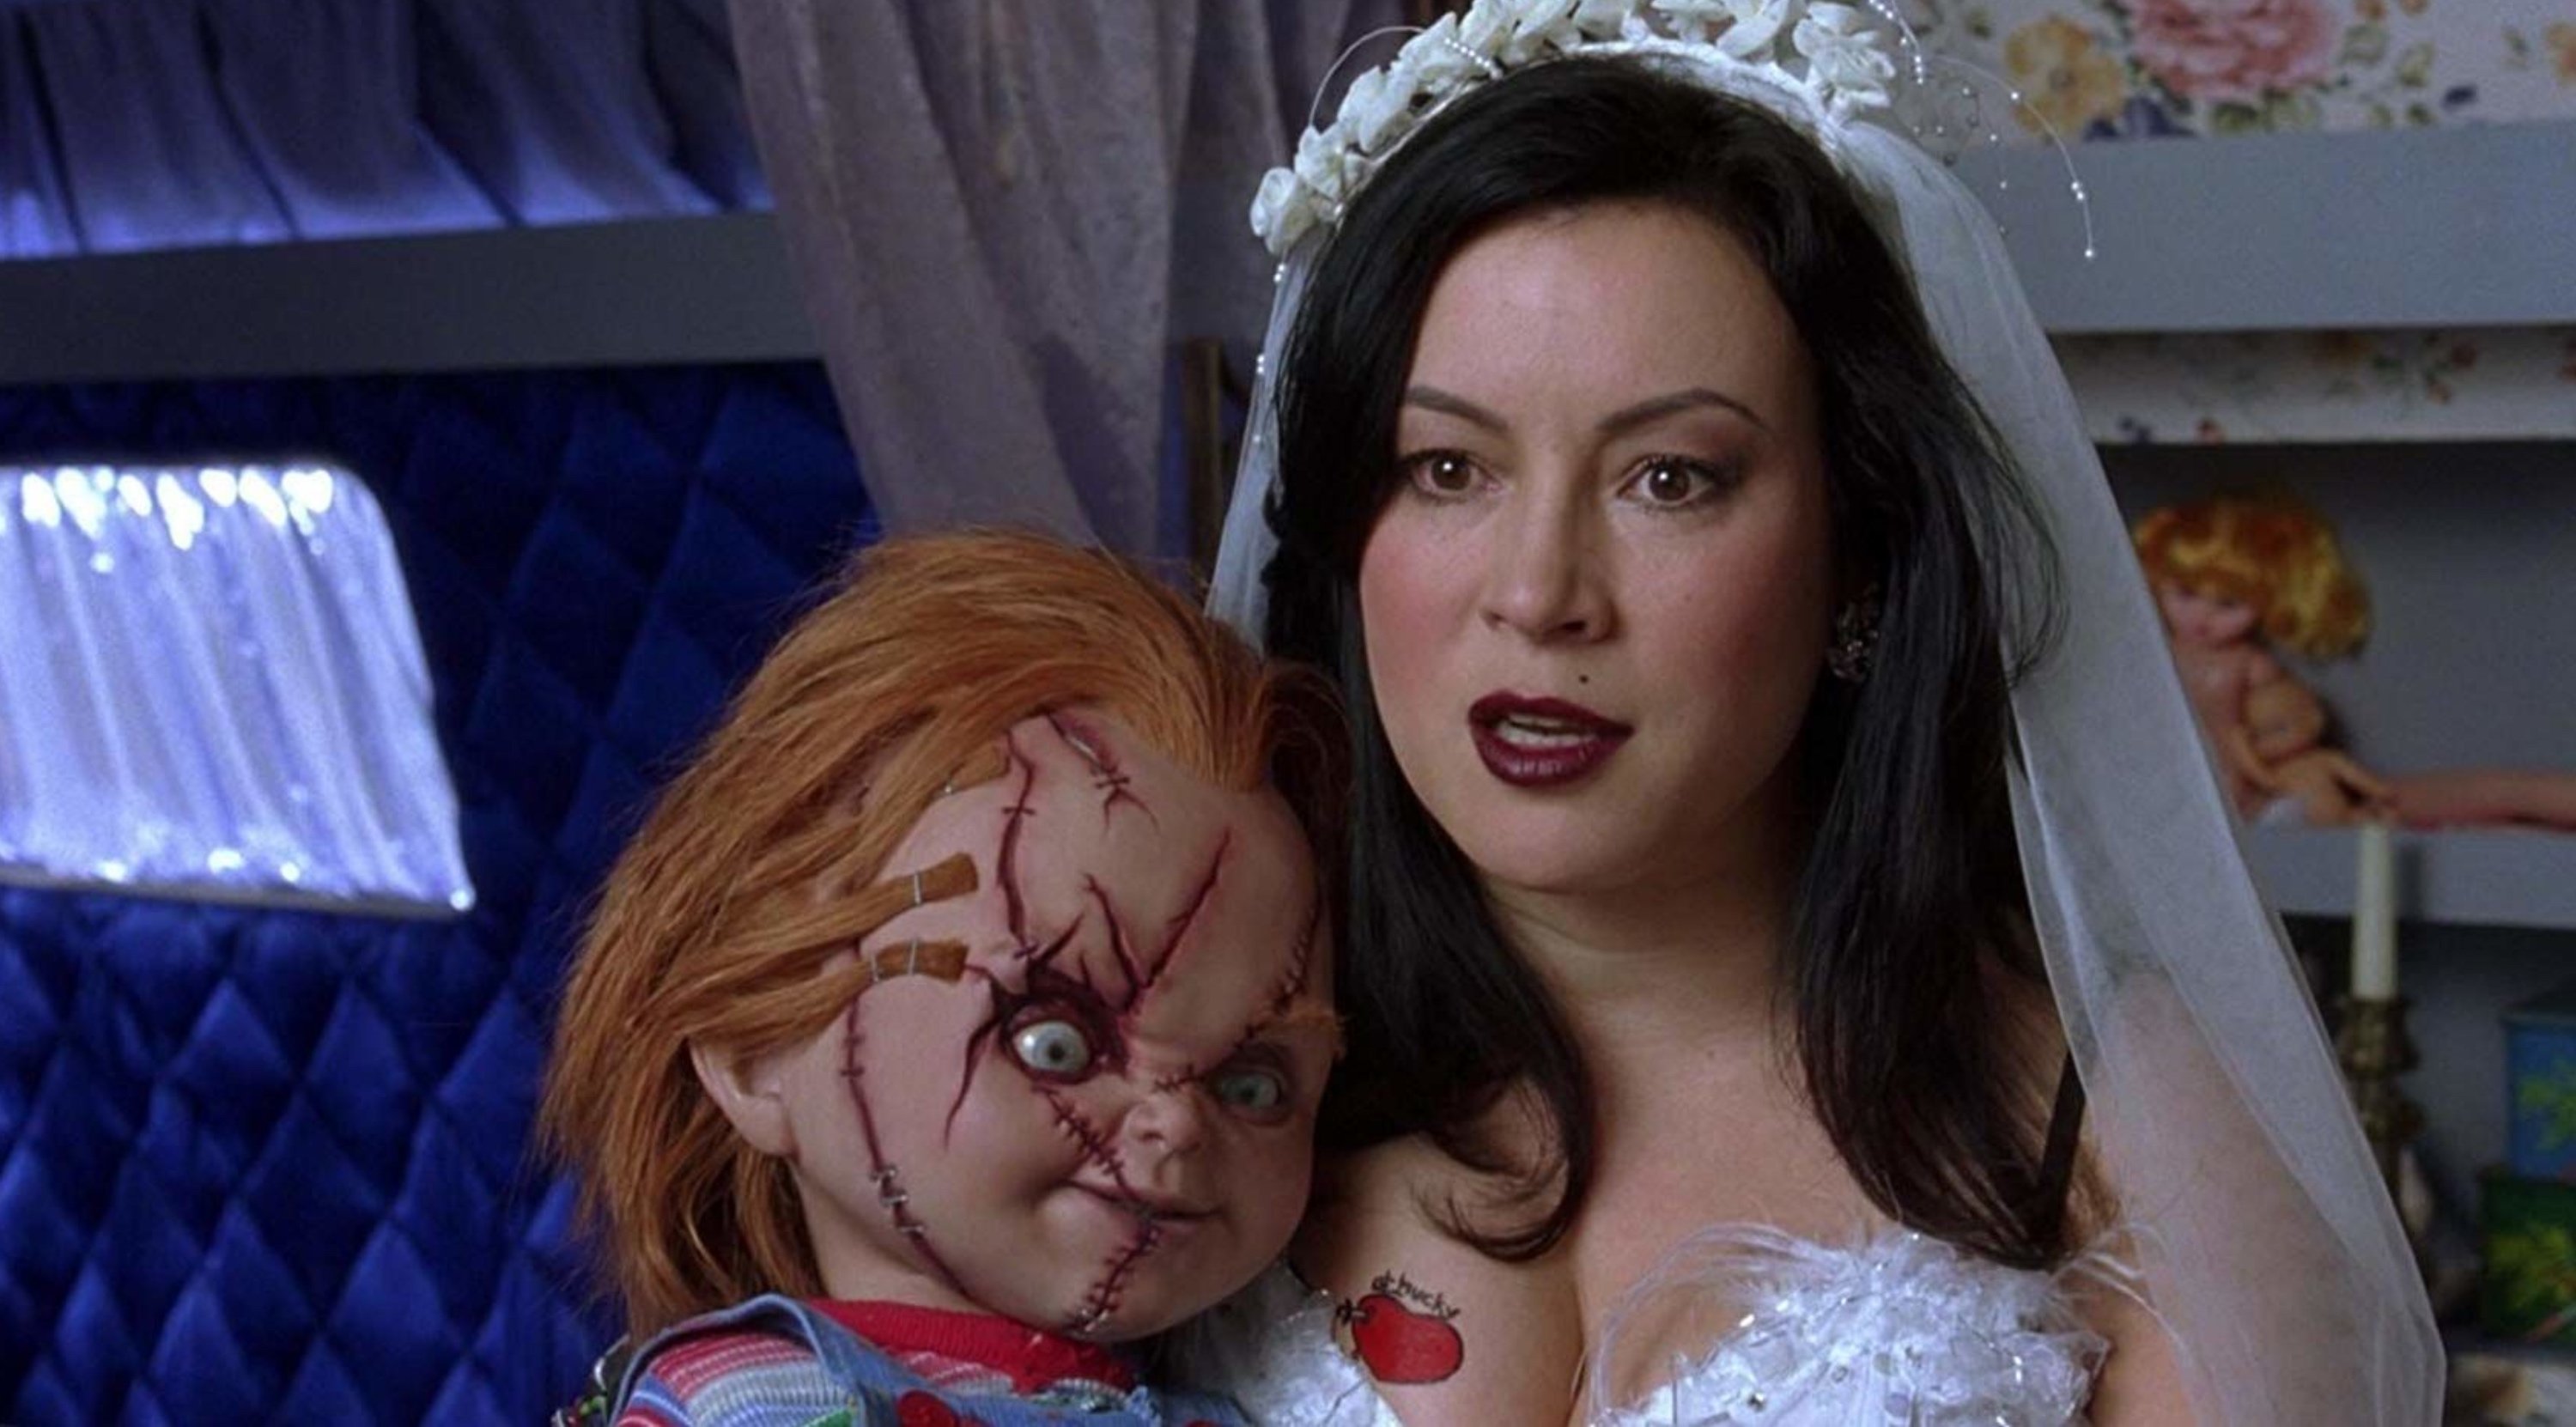 Characters Chucky and Tiffany Valentine in 'Child's Play' franchise wearing wedding dress